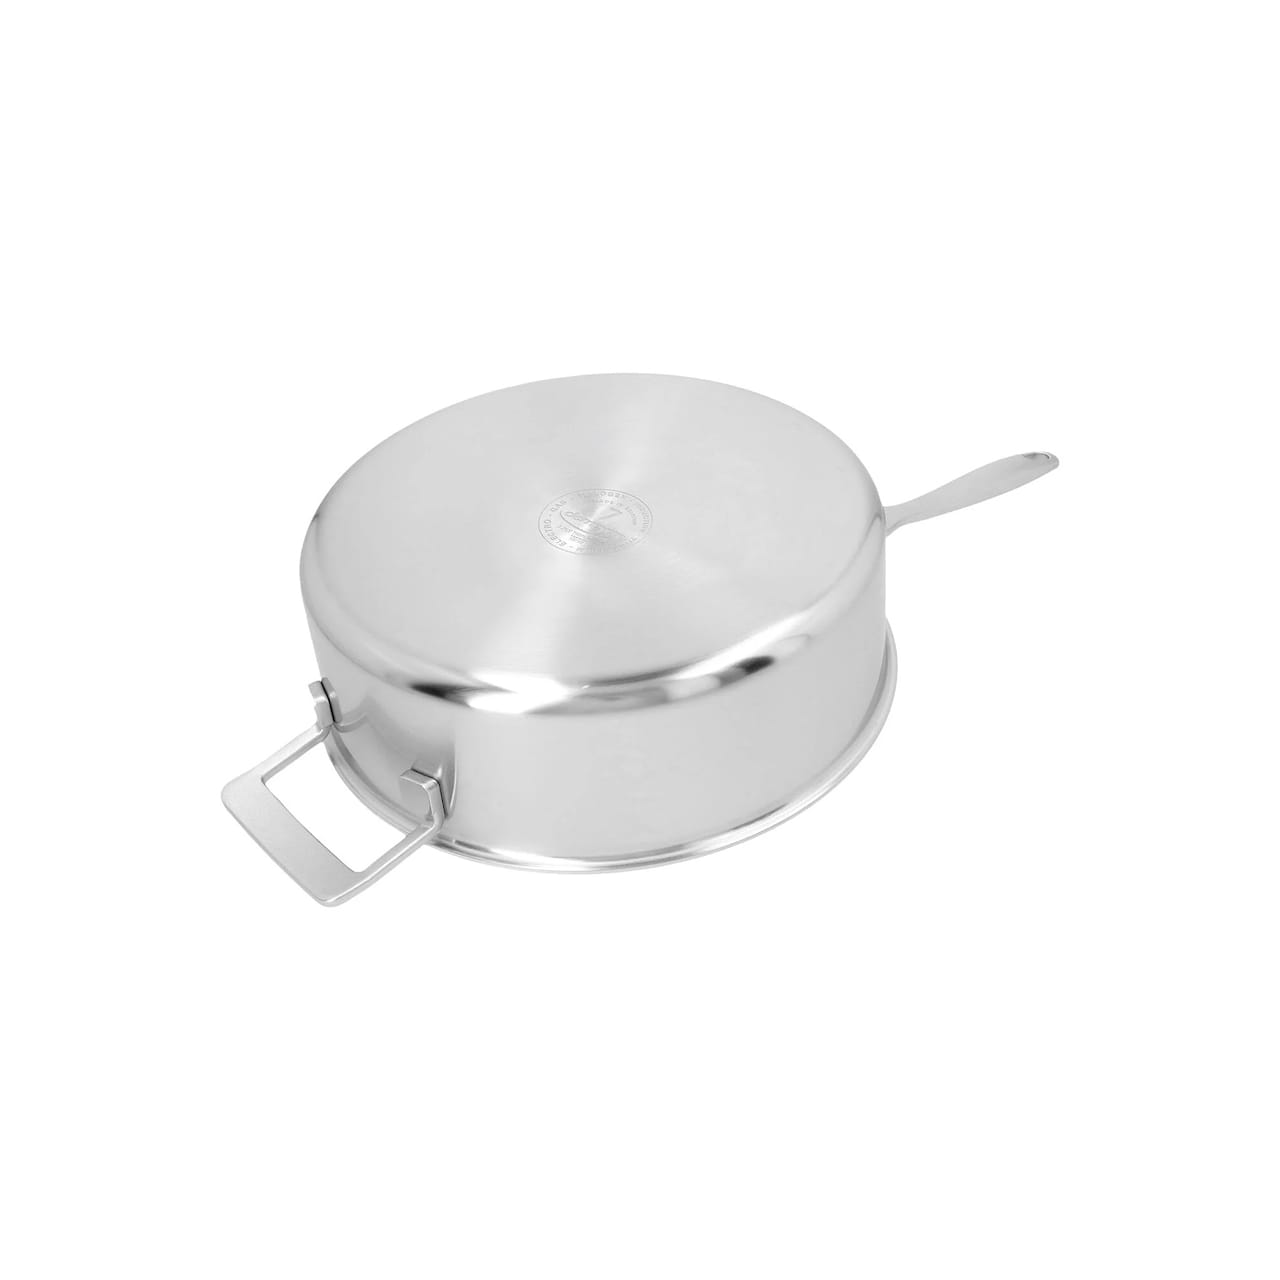 Industry 5 Tractor/Sauté pan with lid - 28 cm